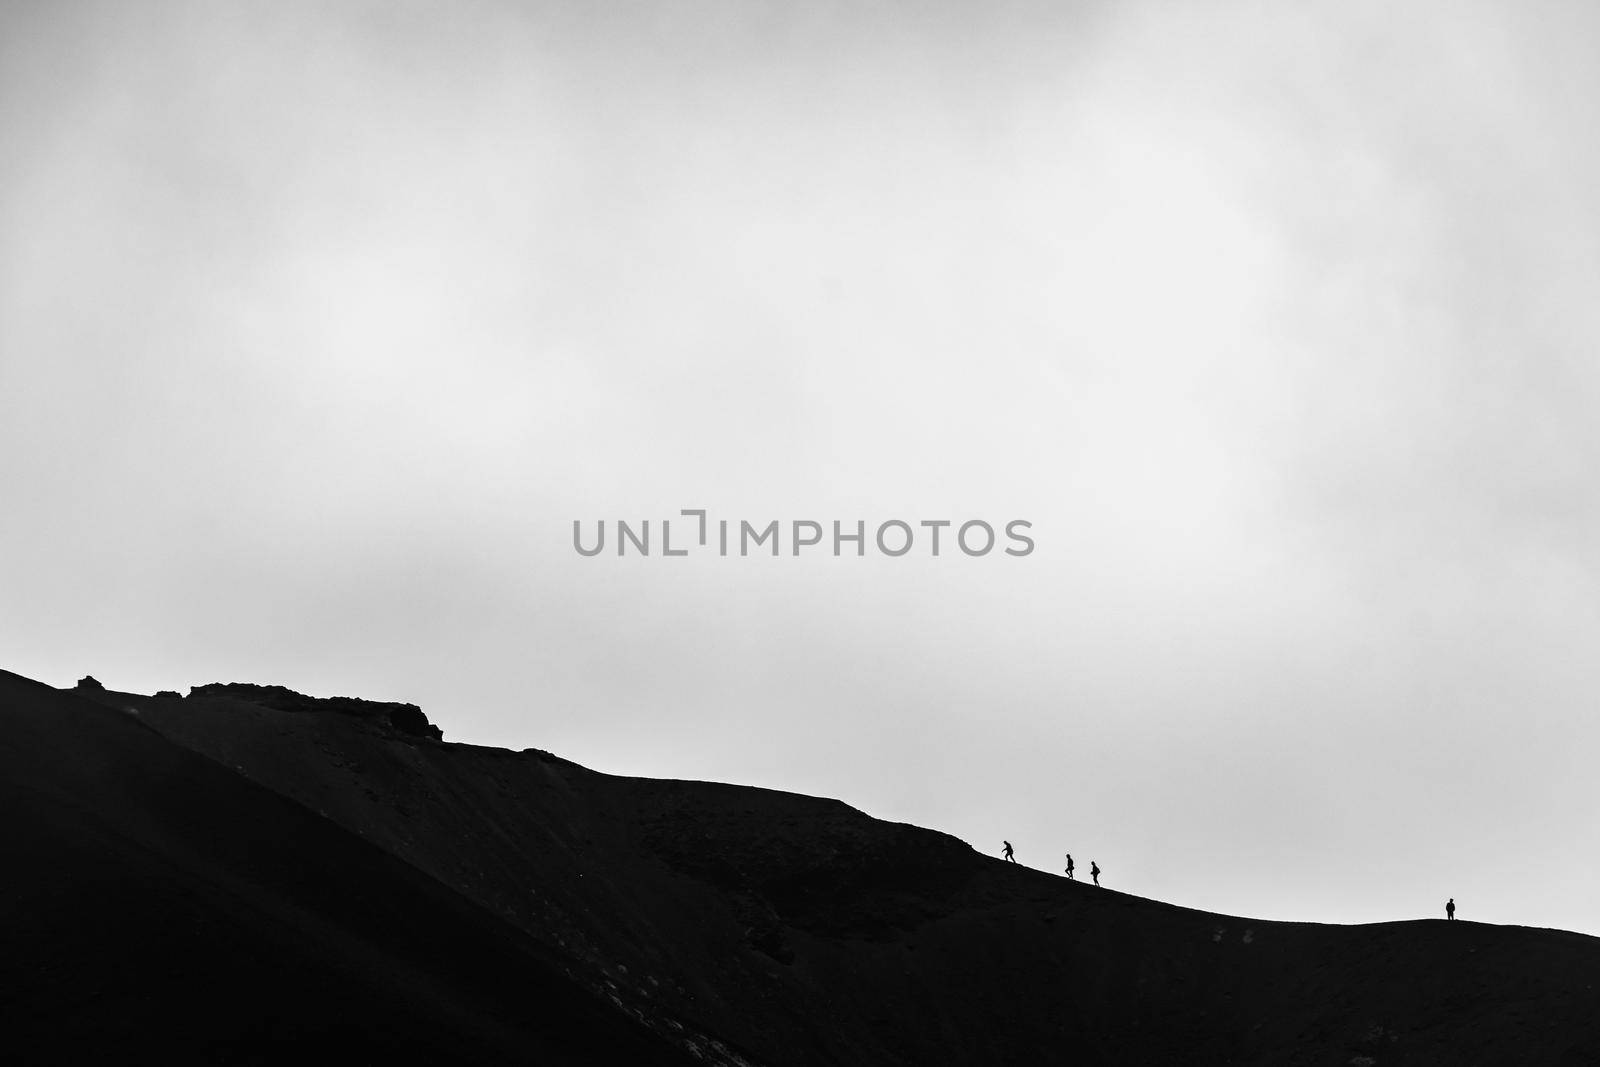 Minimalist image of small silhouette of men climbing on the edge of Etna volcano crater with a cloudy background